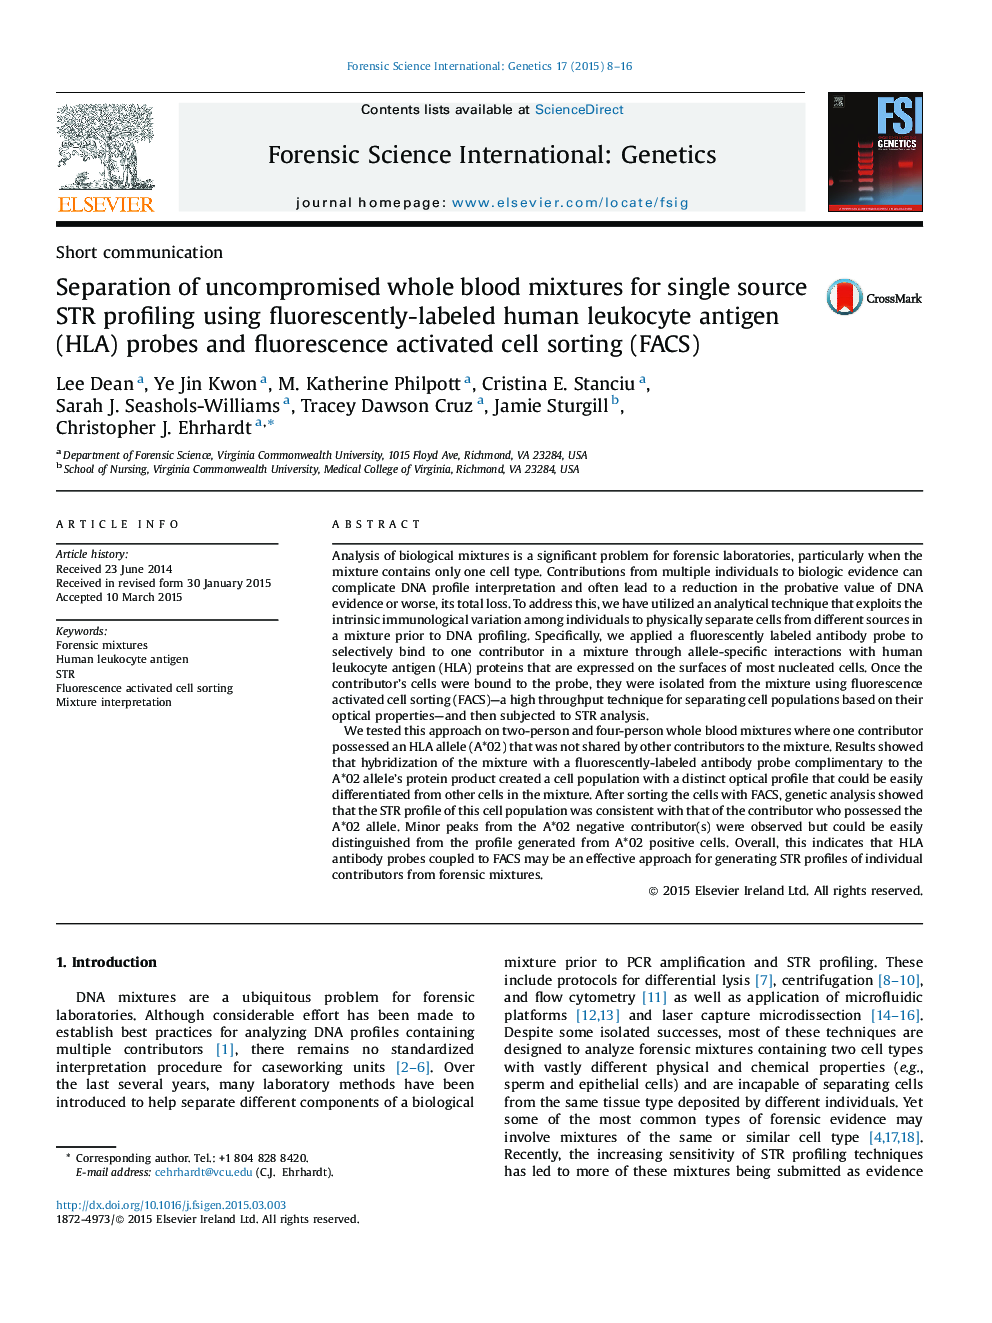 Separation of uncompromised whole blood mixtures for single source STR profiling using fluorescently-labeled human leukocyte antigen (HLA) probes and fluorescence activated cell sorting (FACS)